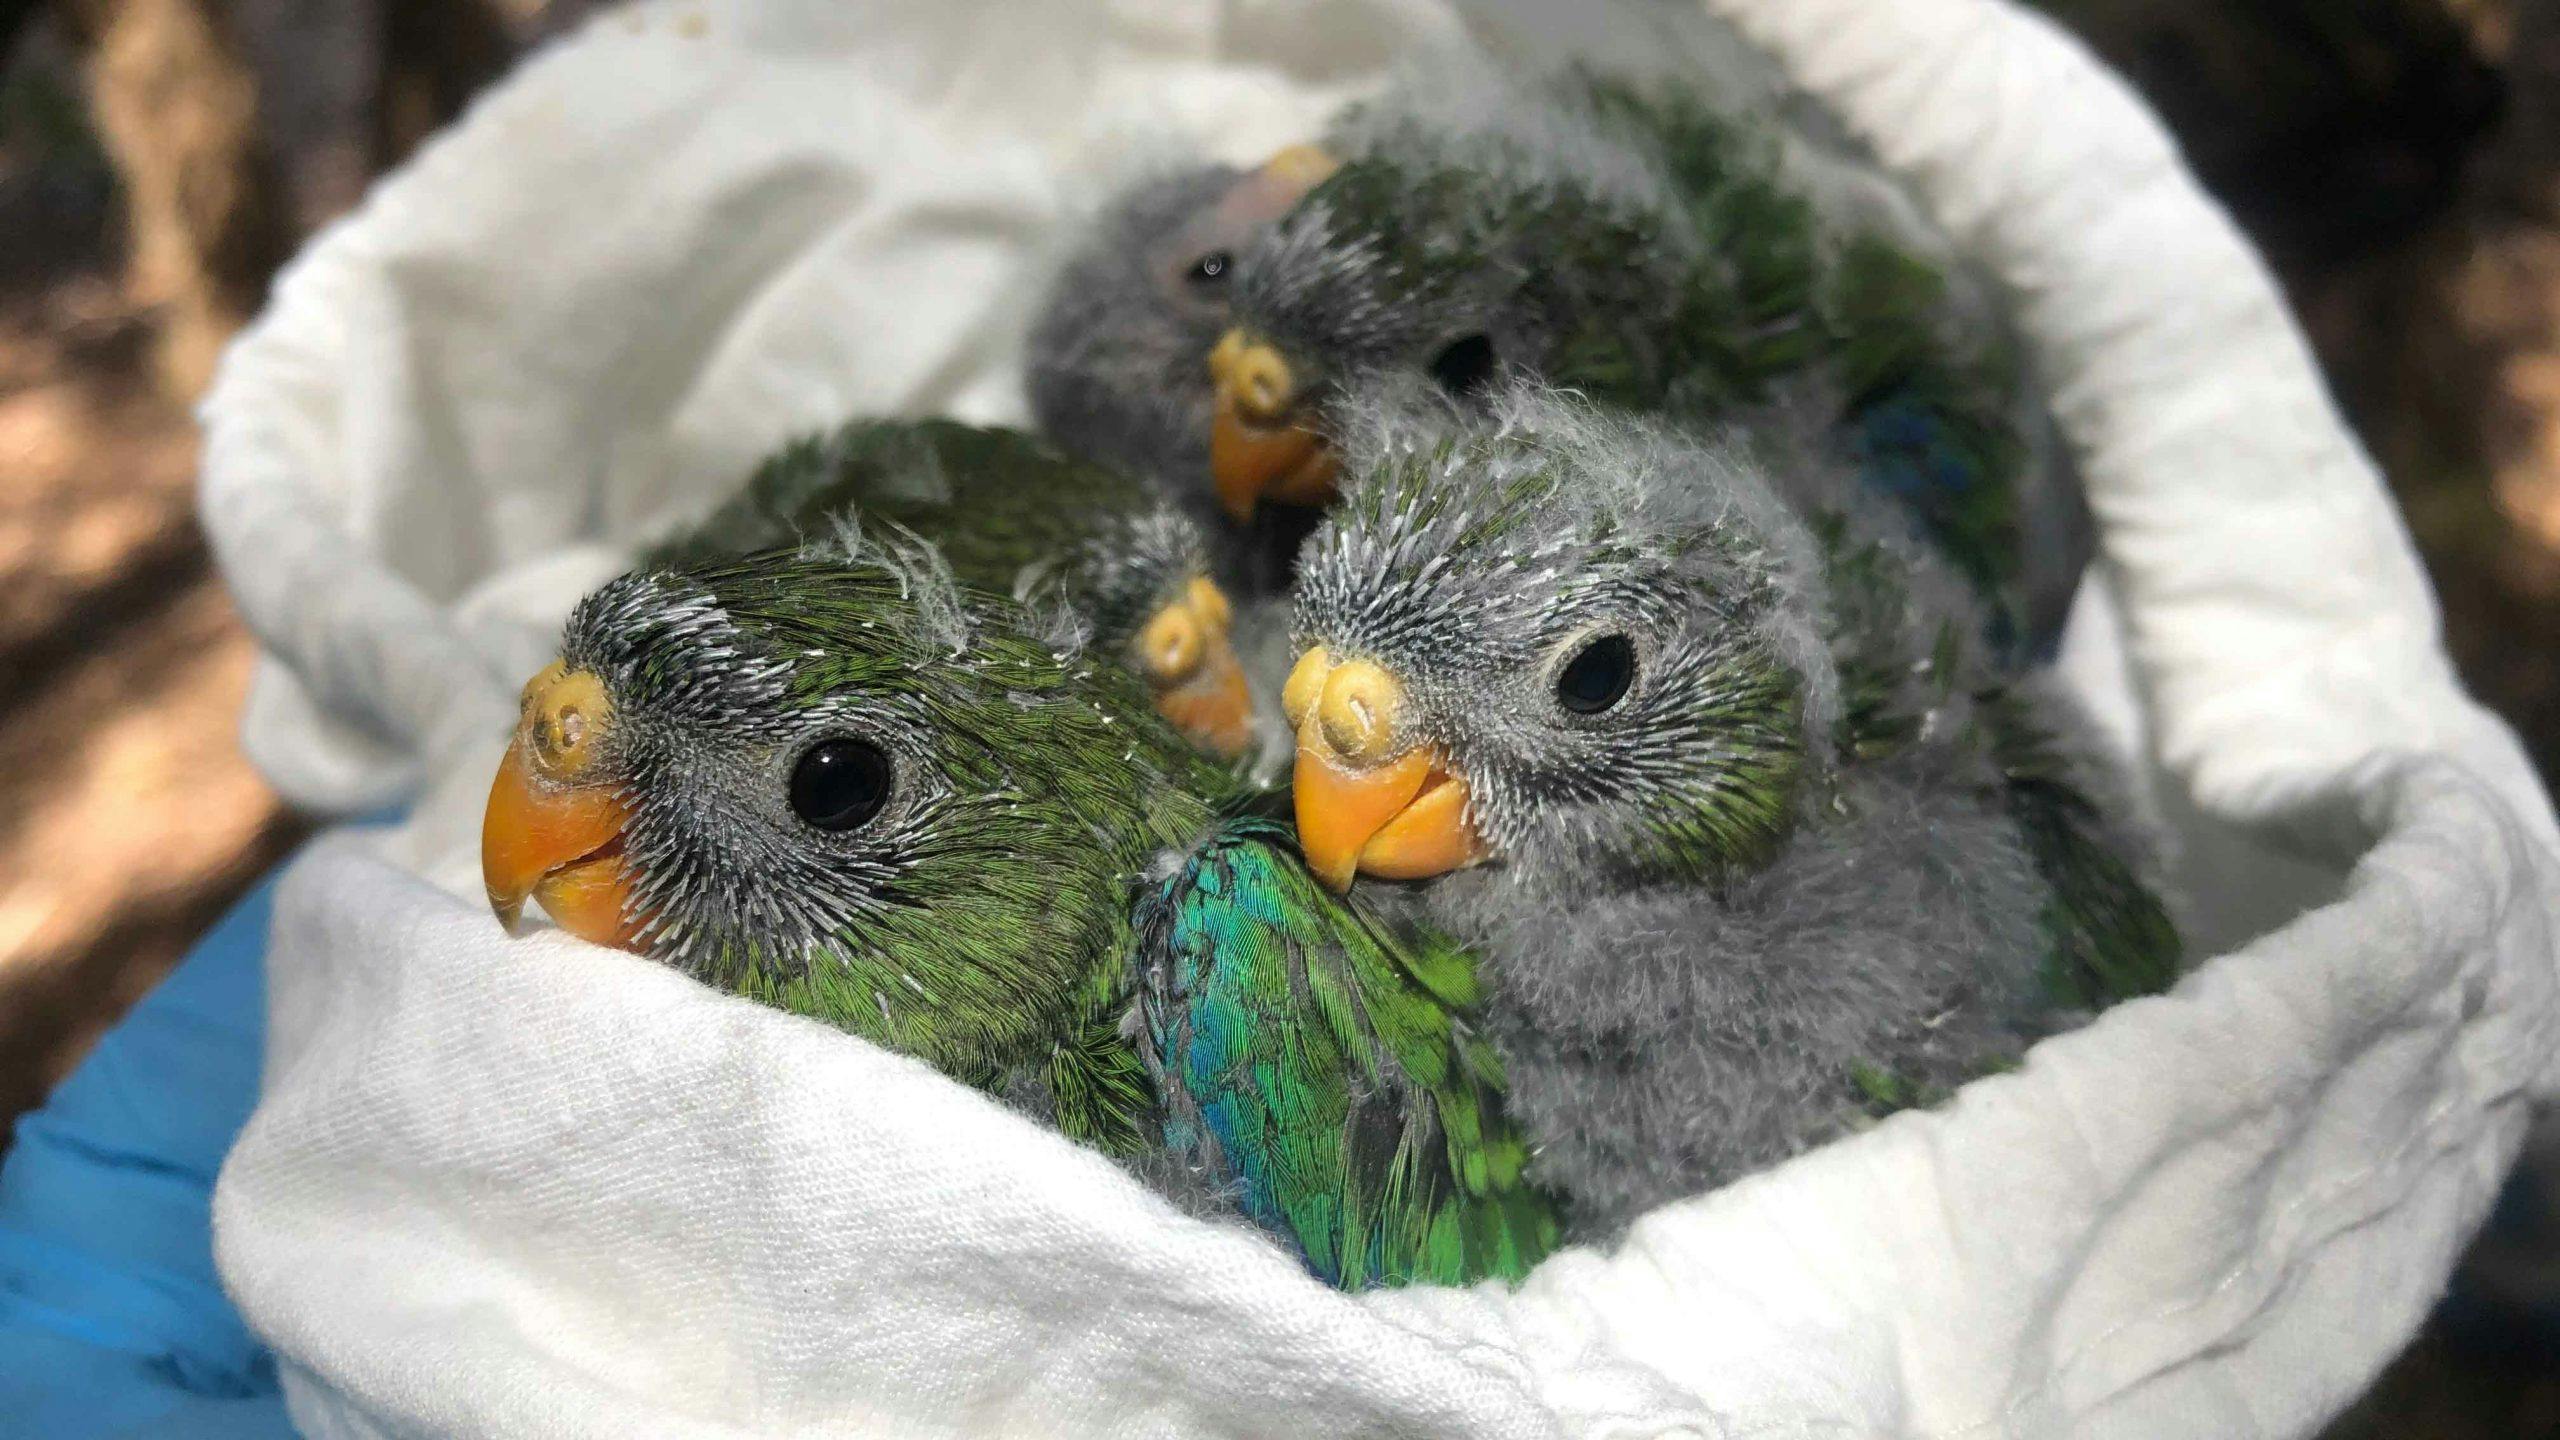 three juvenile parrots with grey and green feathers, orange beaks and black eyes are nestled in a pouch